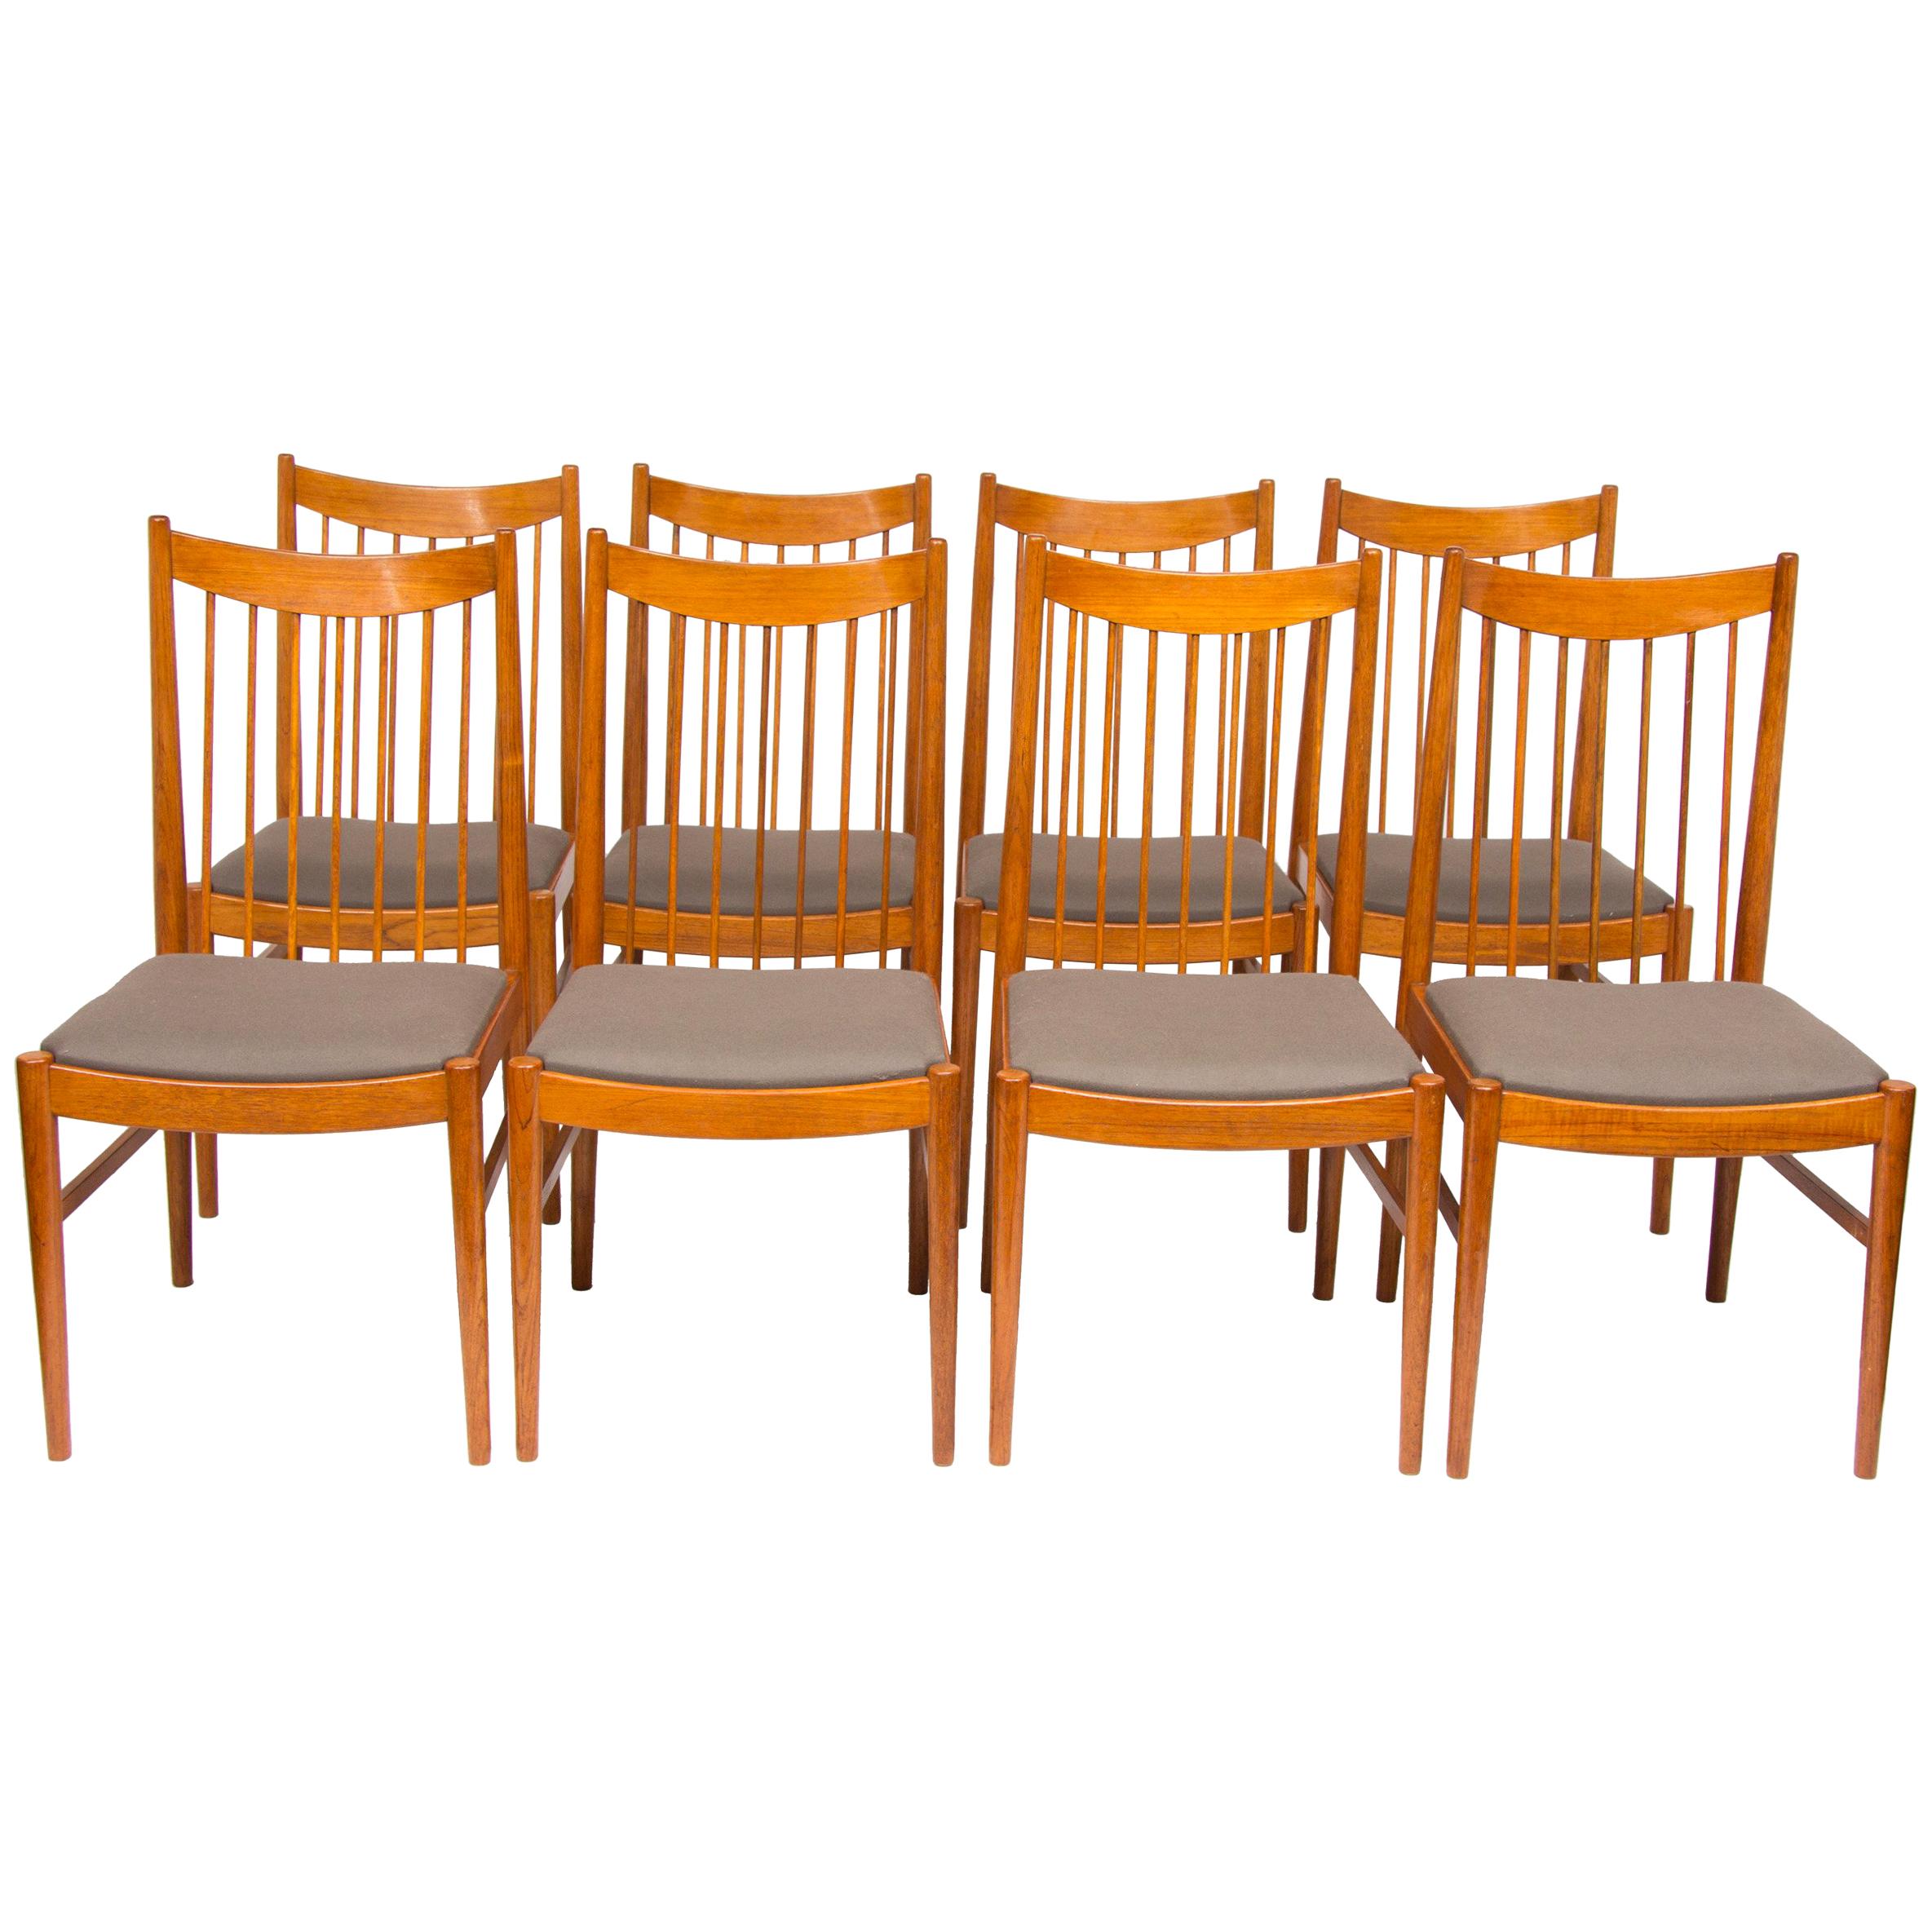 Set of Eight Midcentury Teak Dining Chairs by Arne Vodder for Sibast